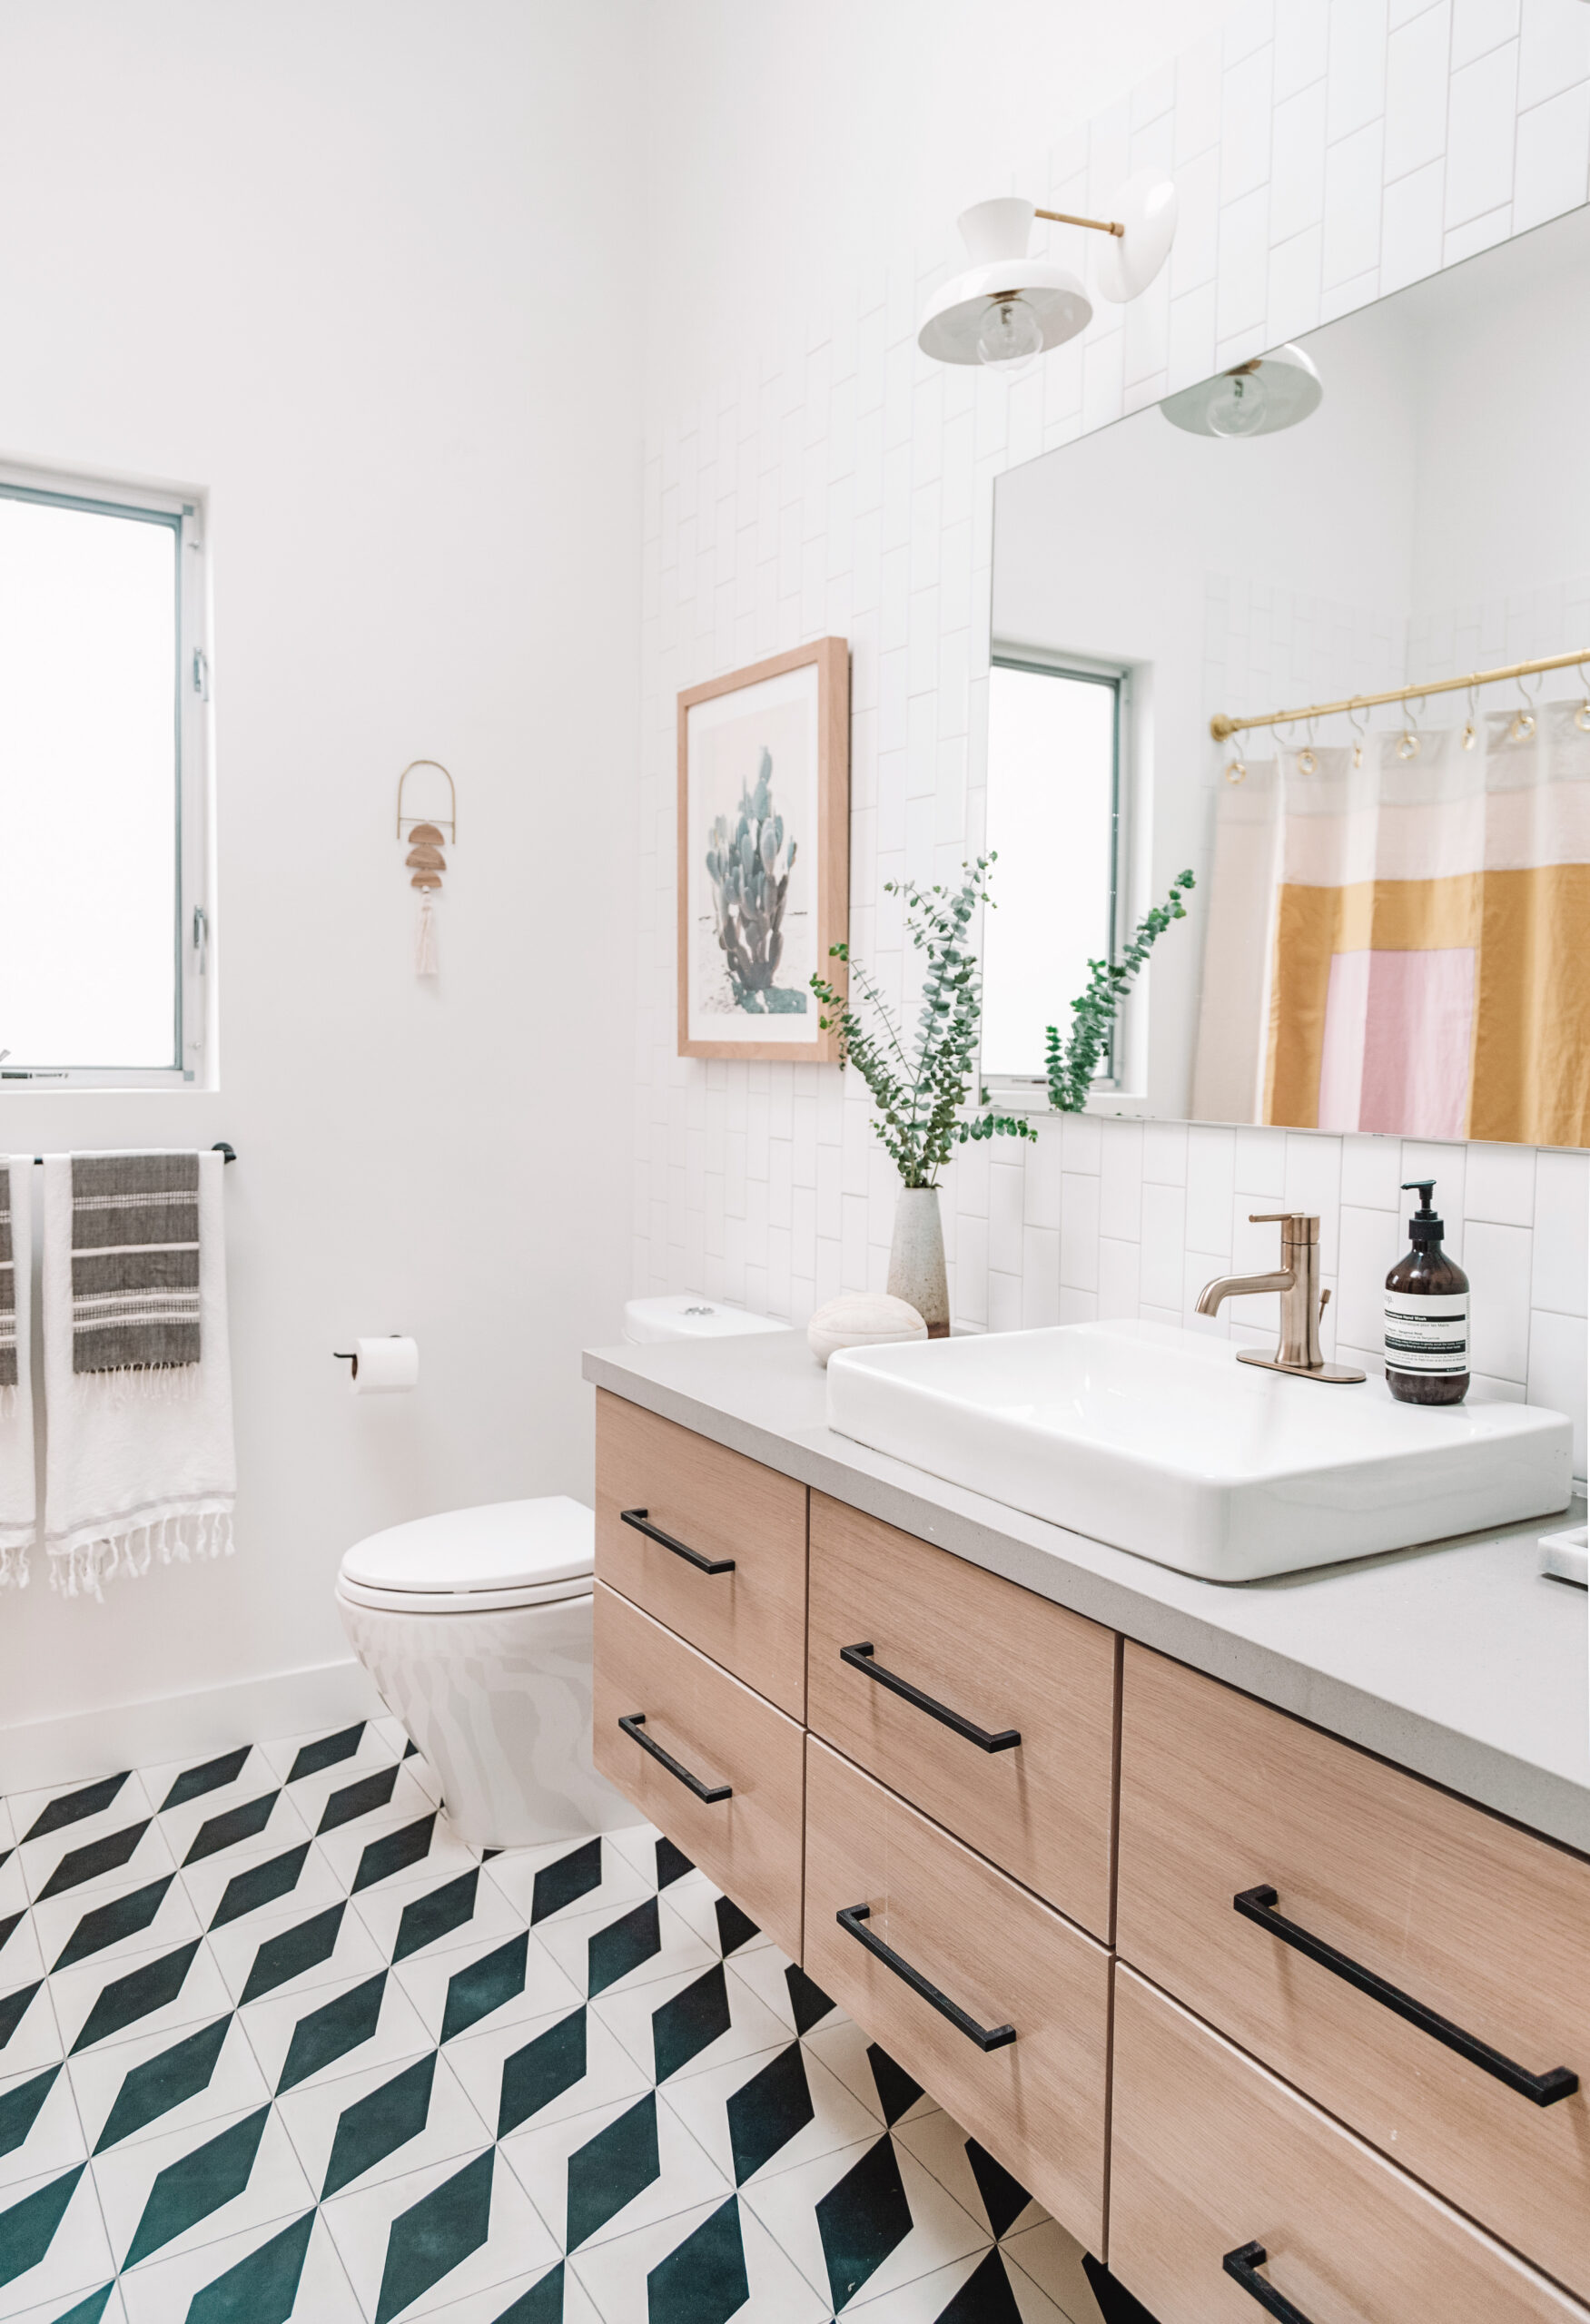 Bathroom with patterned tile floors